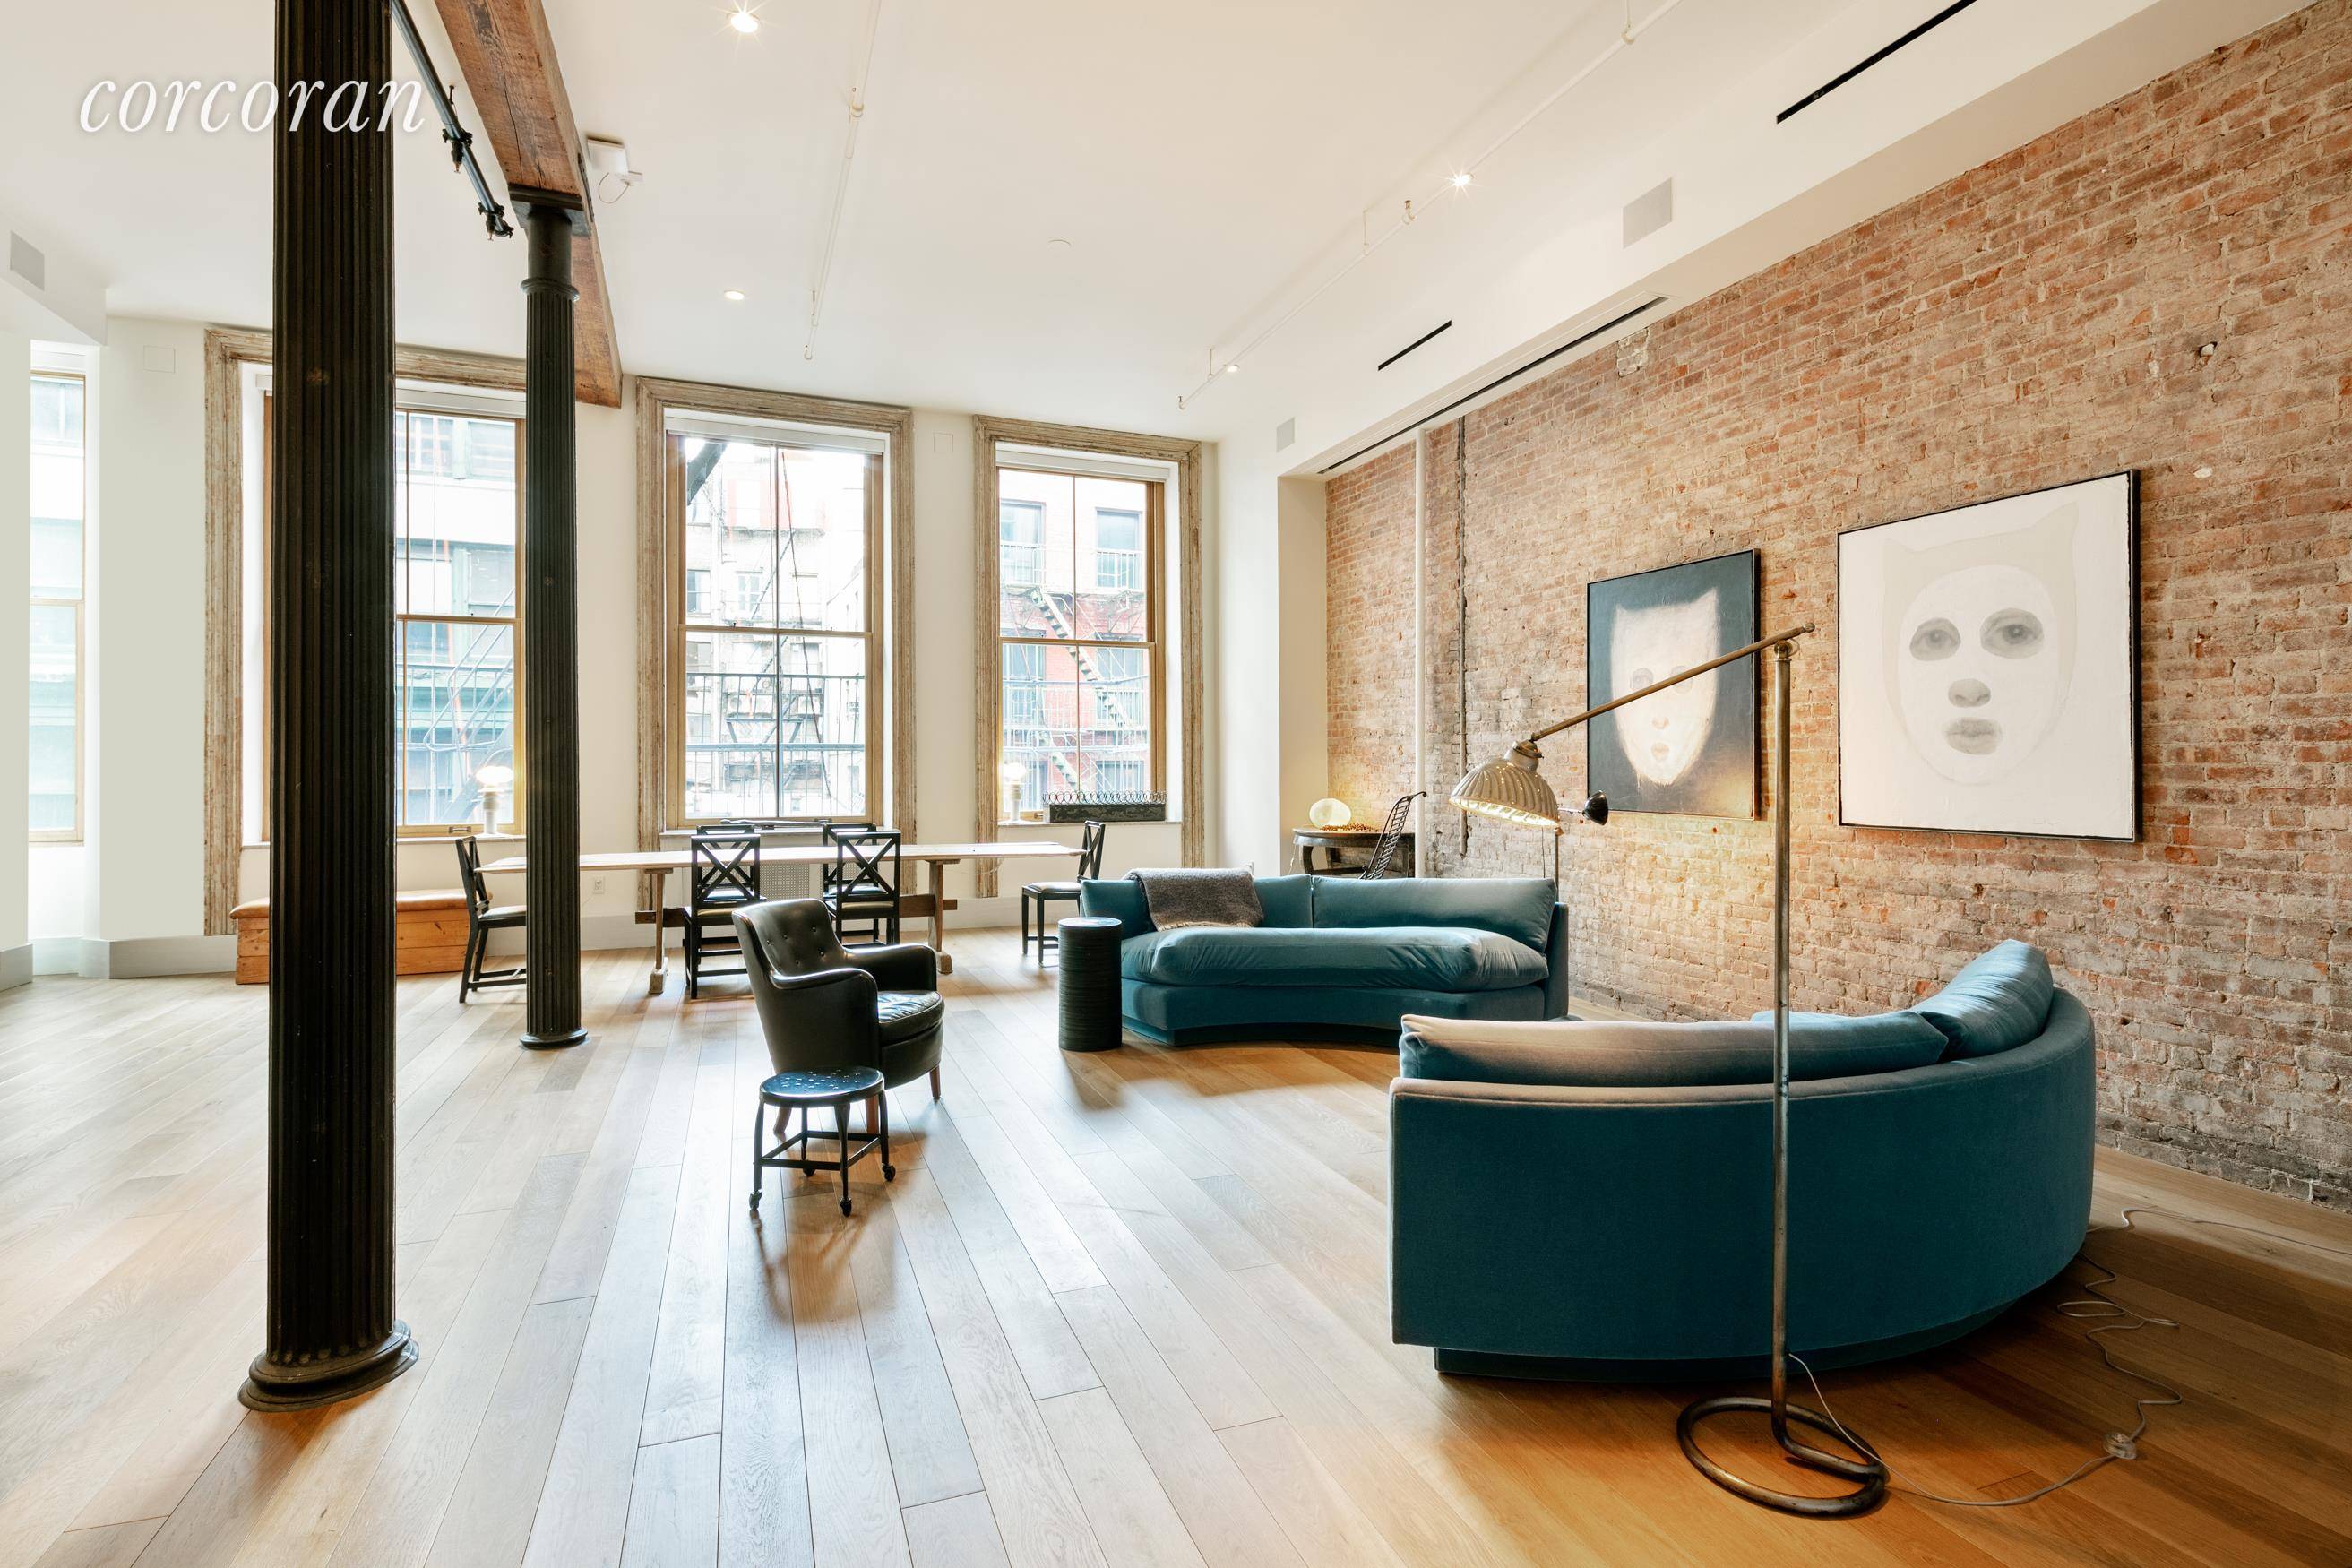 A true extra wide Tribeca loft, this flawlessly renovated home features coveted original details highlighted by premier designer updates to create one of the finest three bedroom, two and a ...